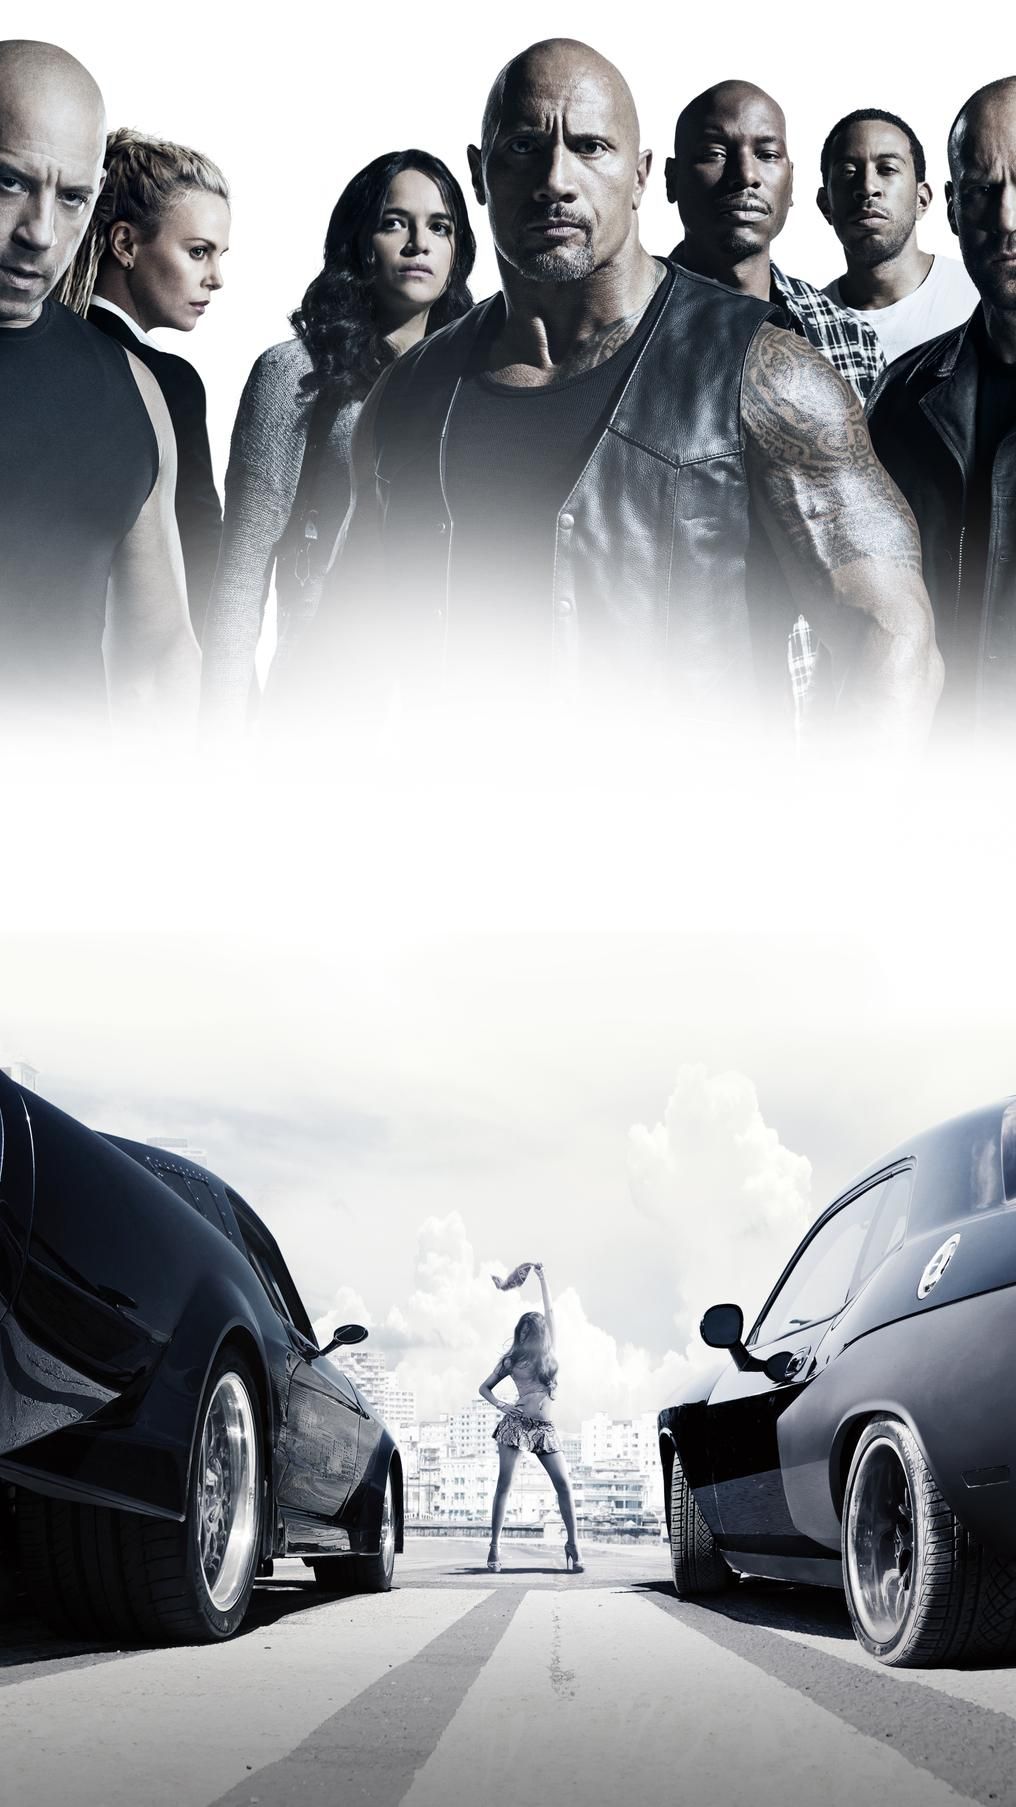 The Fate of the Furious (2017) Phone Wallpaper. Moviemania. Fast and furious, Movie fast and furious, Fast and furious cast